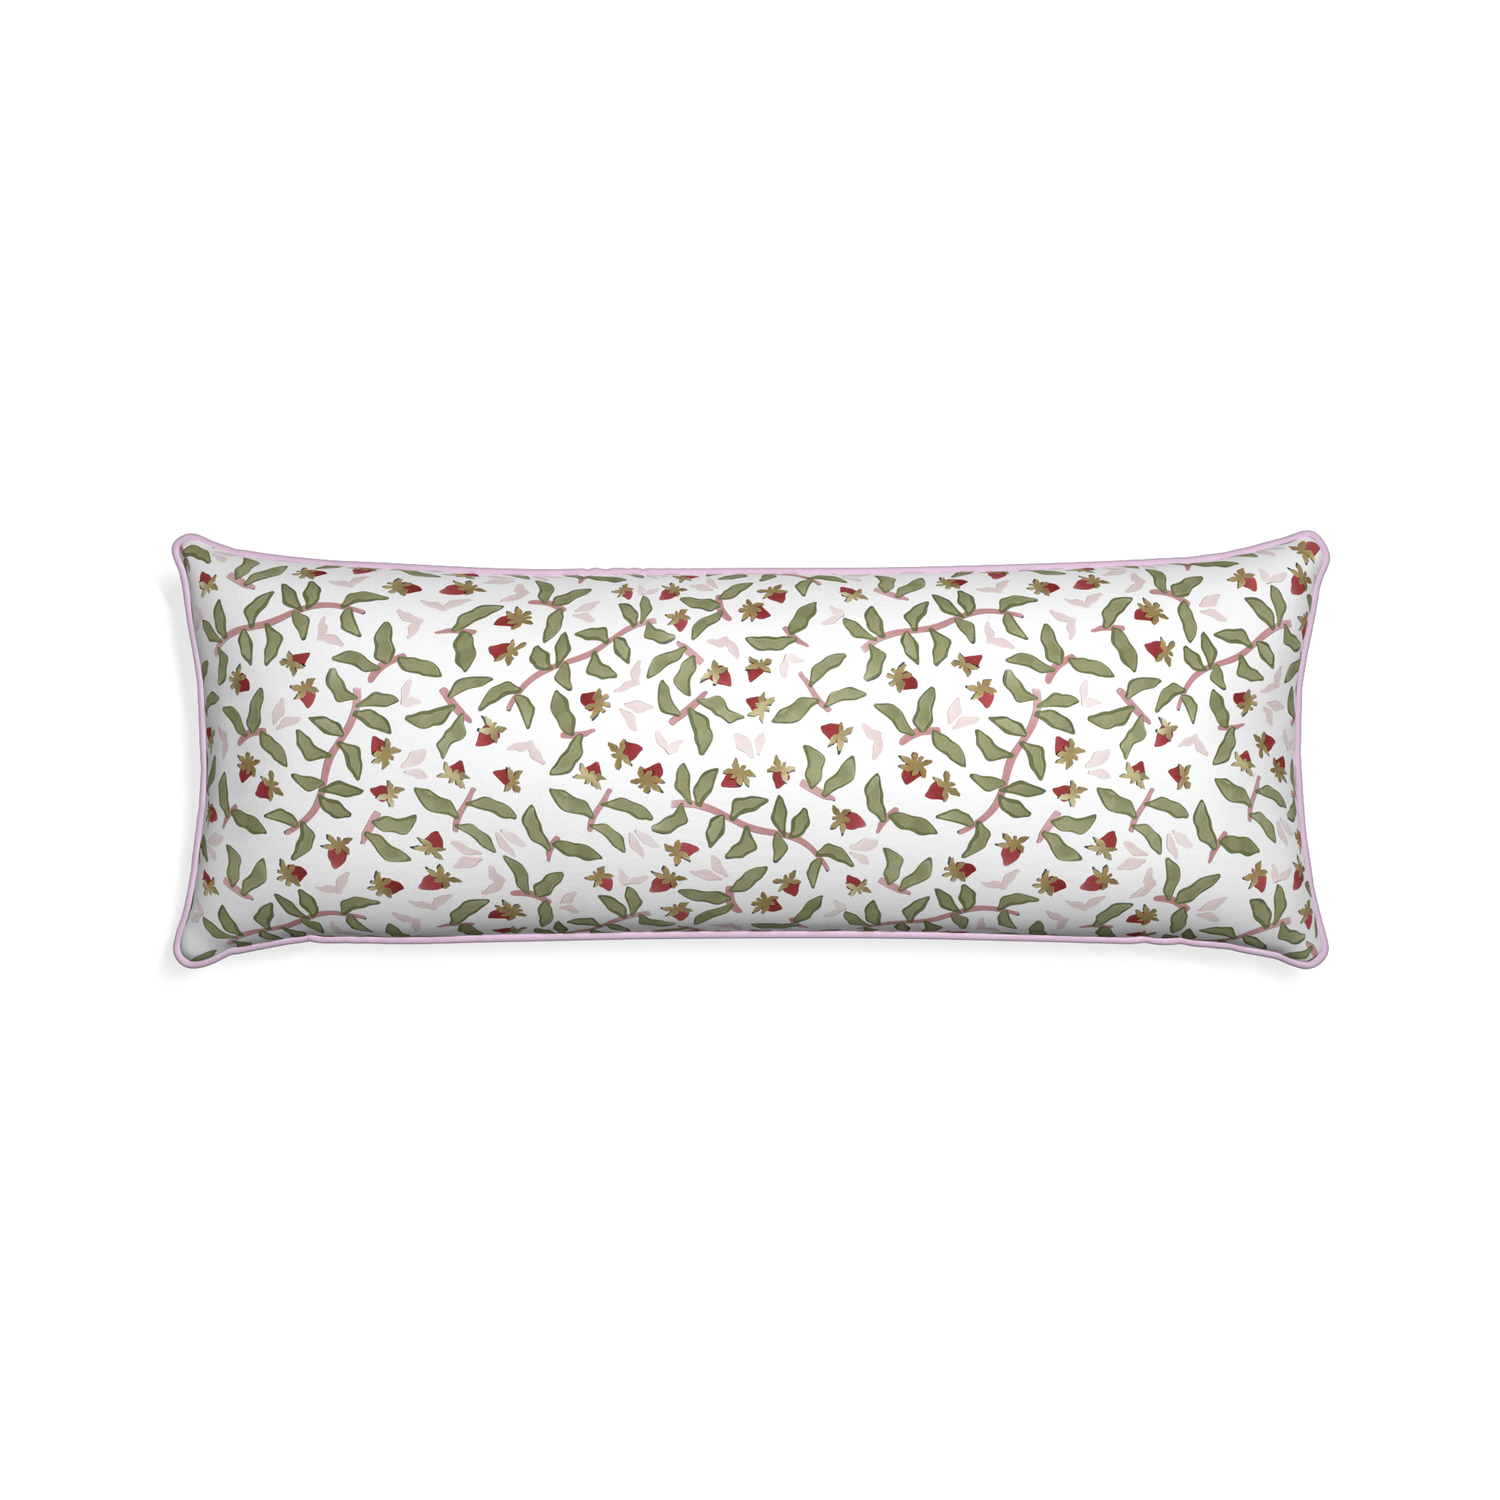 Xl-lumbar nellie custom strawberry & botanicalpillow with l piping on white background